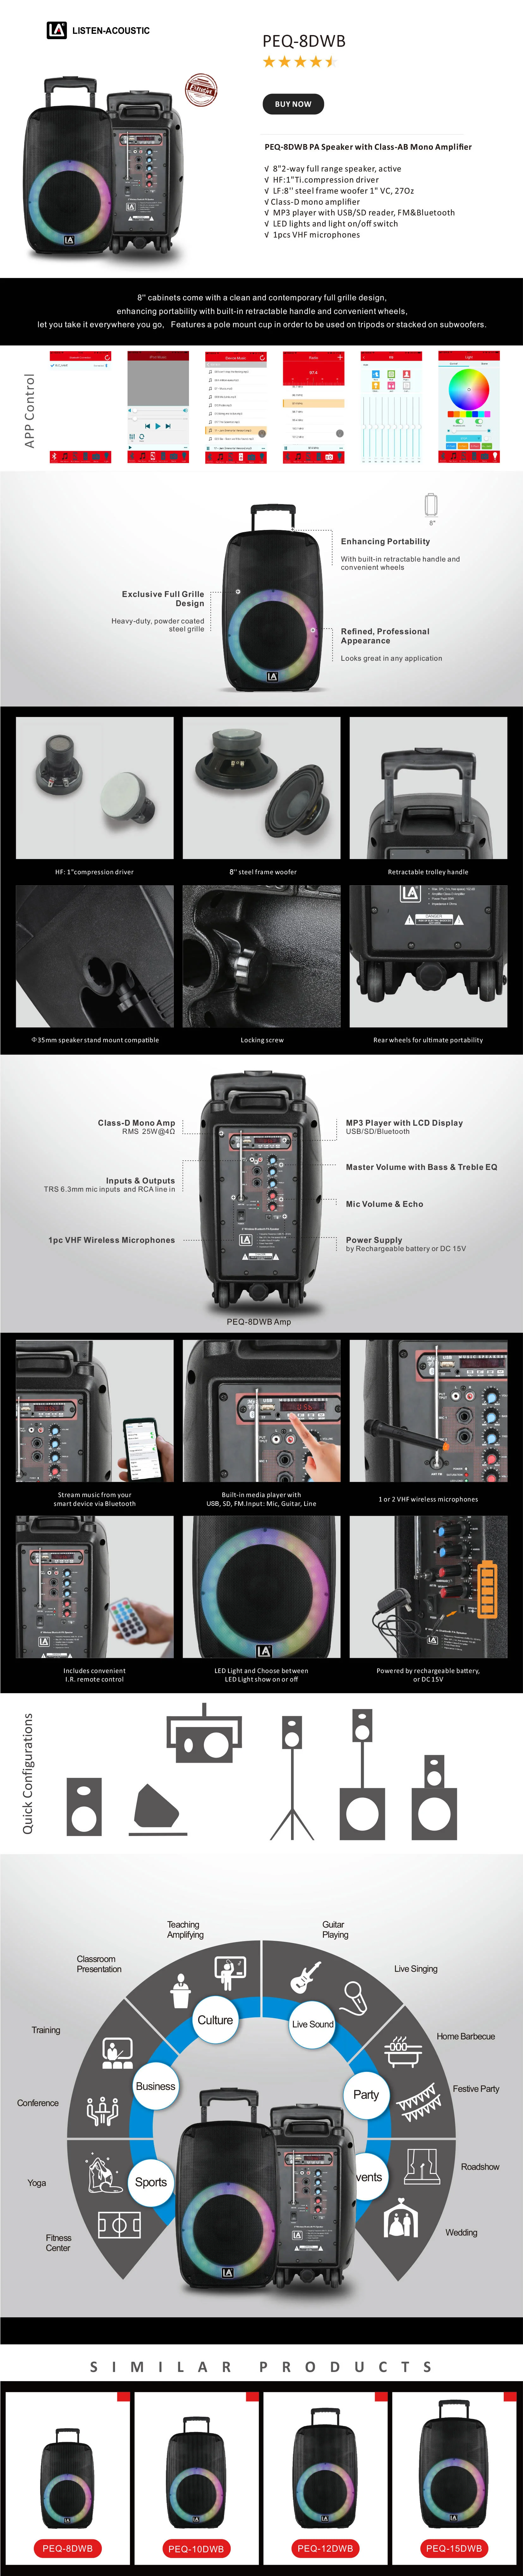 DJ speakers, portable microphone and speaker, church speakers, PA System PEQ-DWB Series